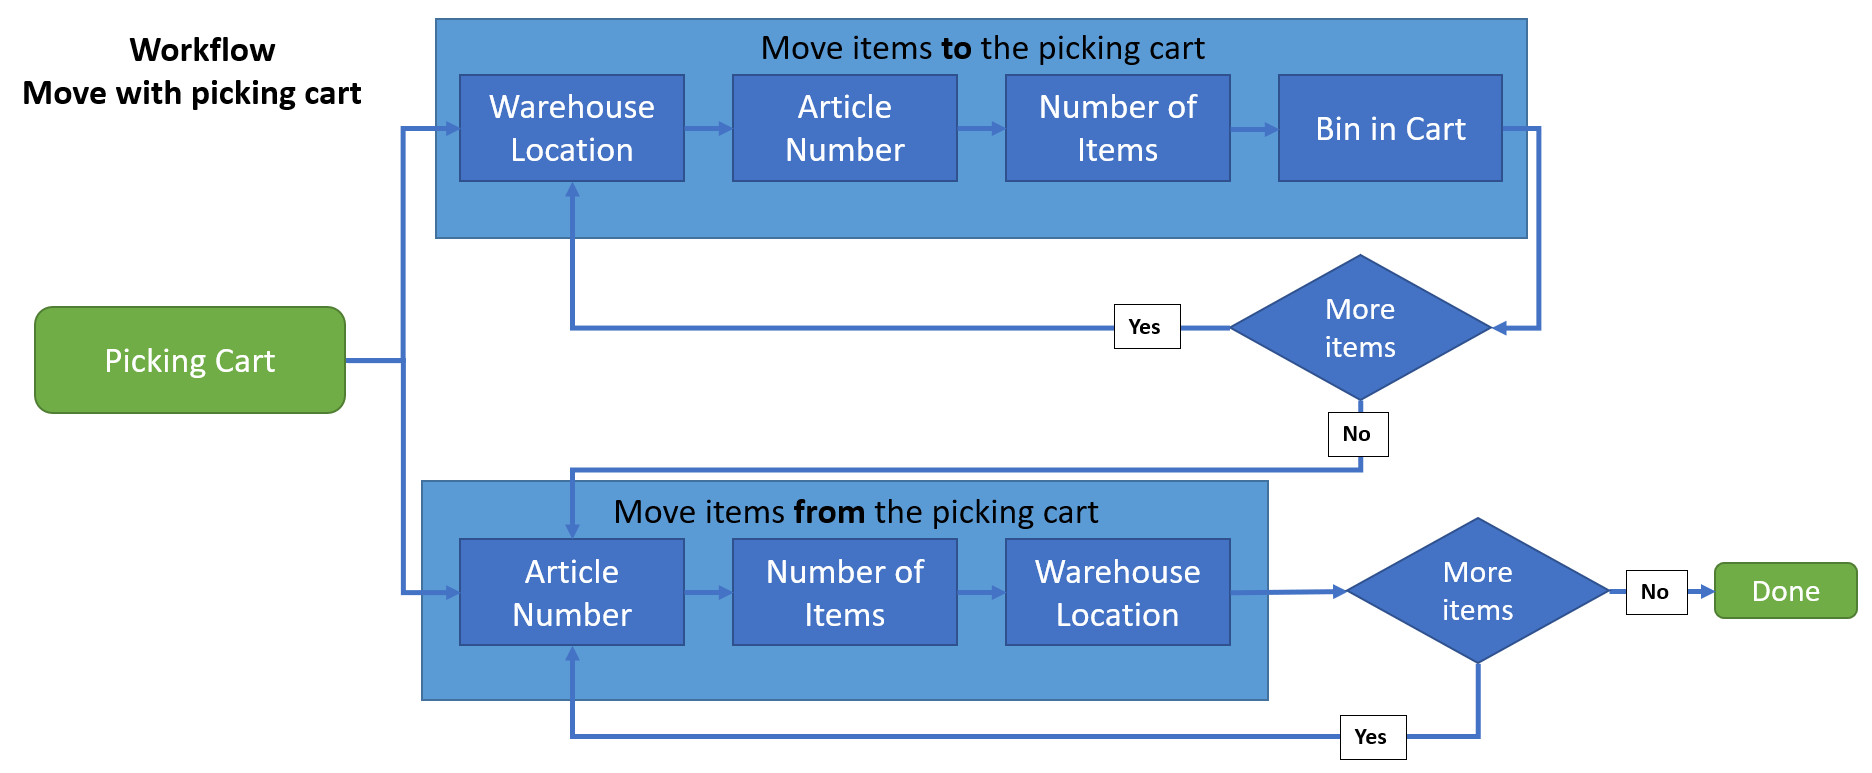 Flow chart showing the work flow when moving goods to and from the picking cart.